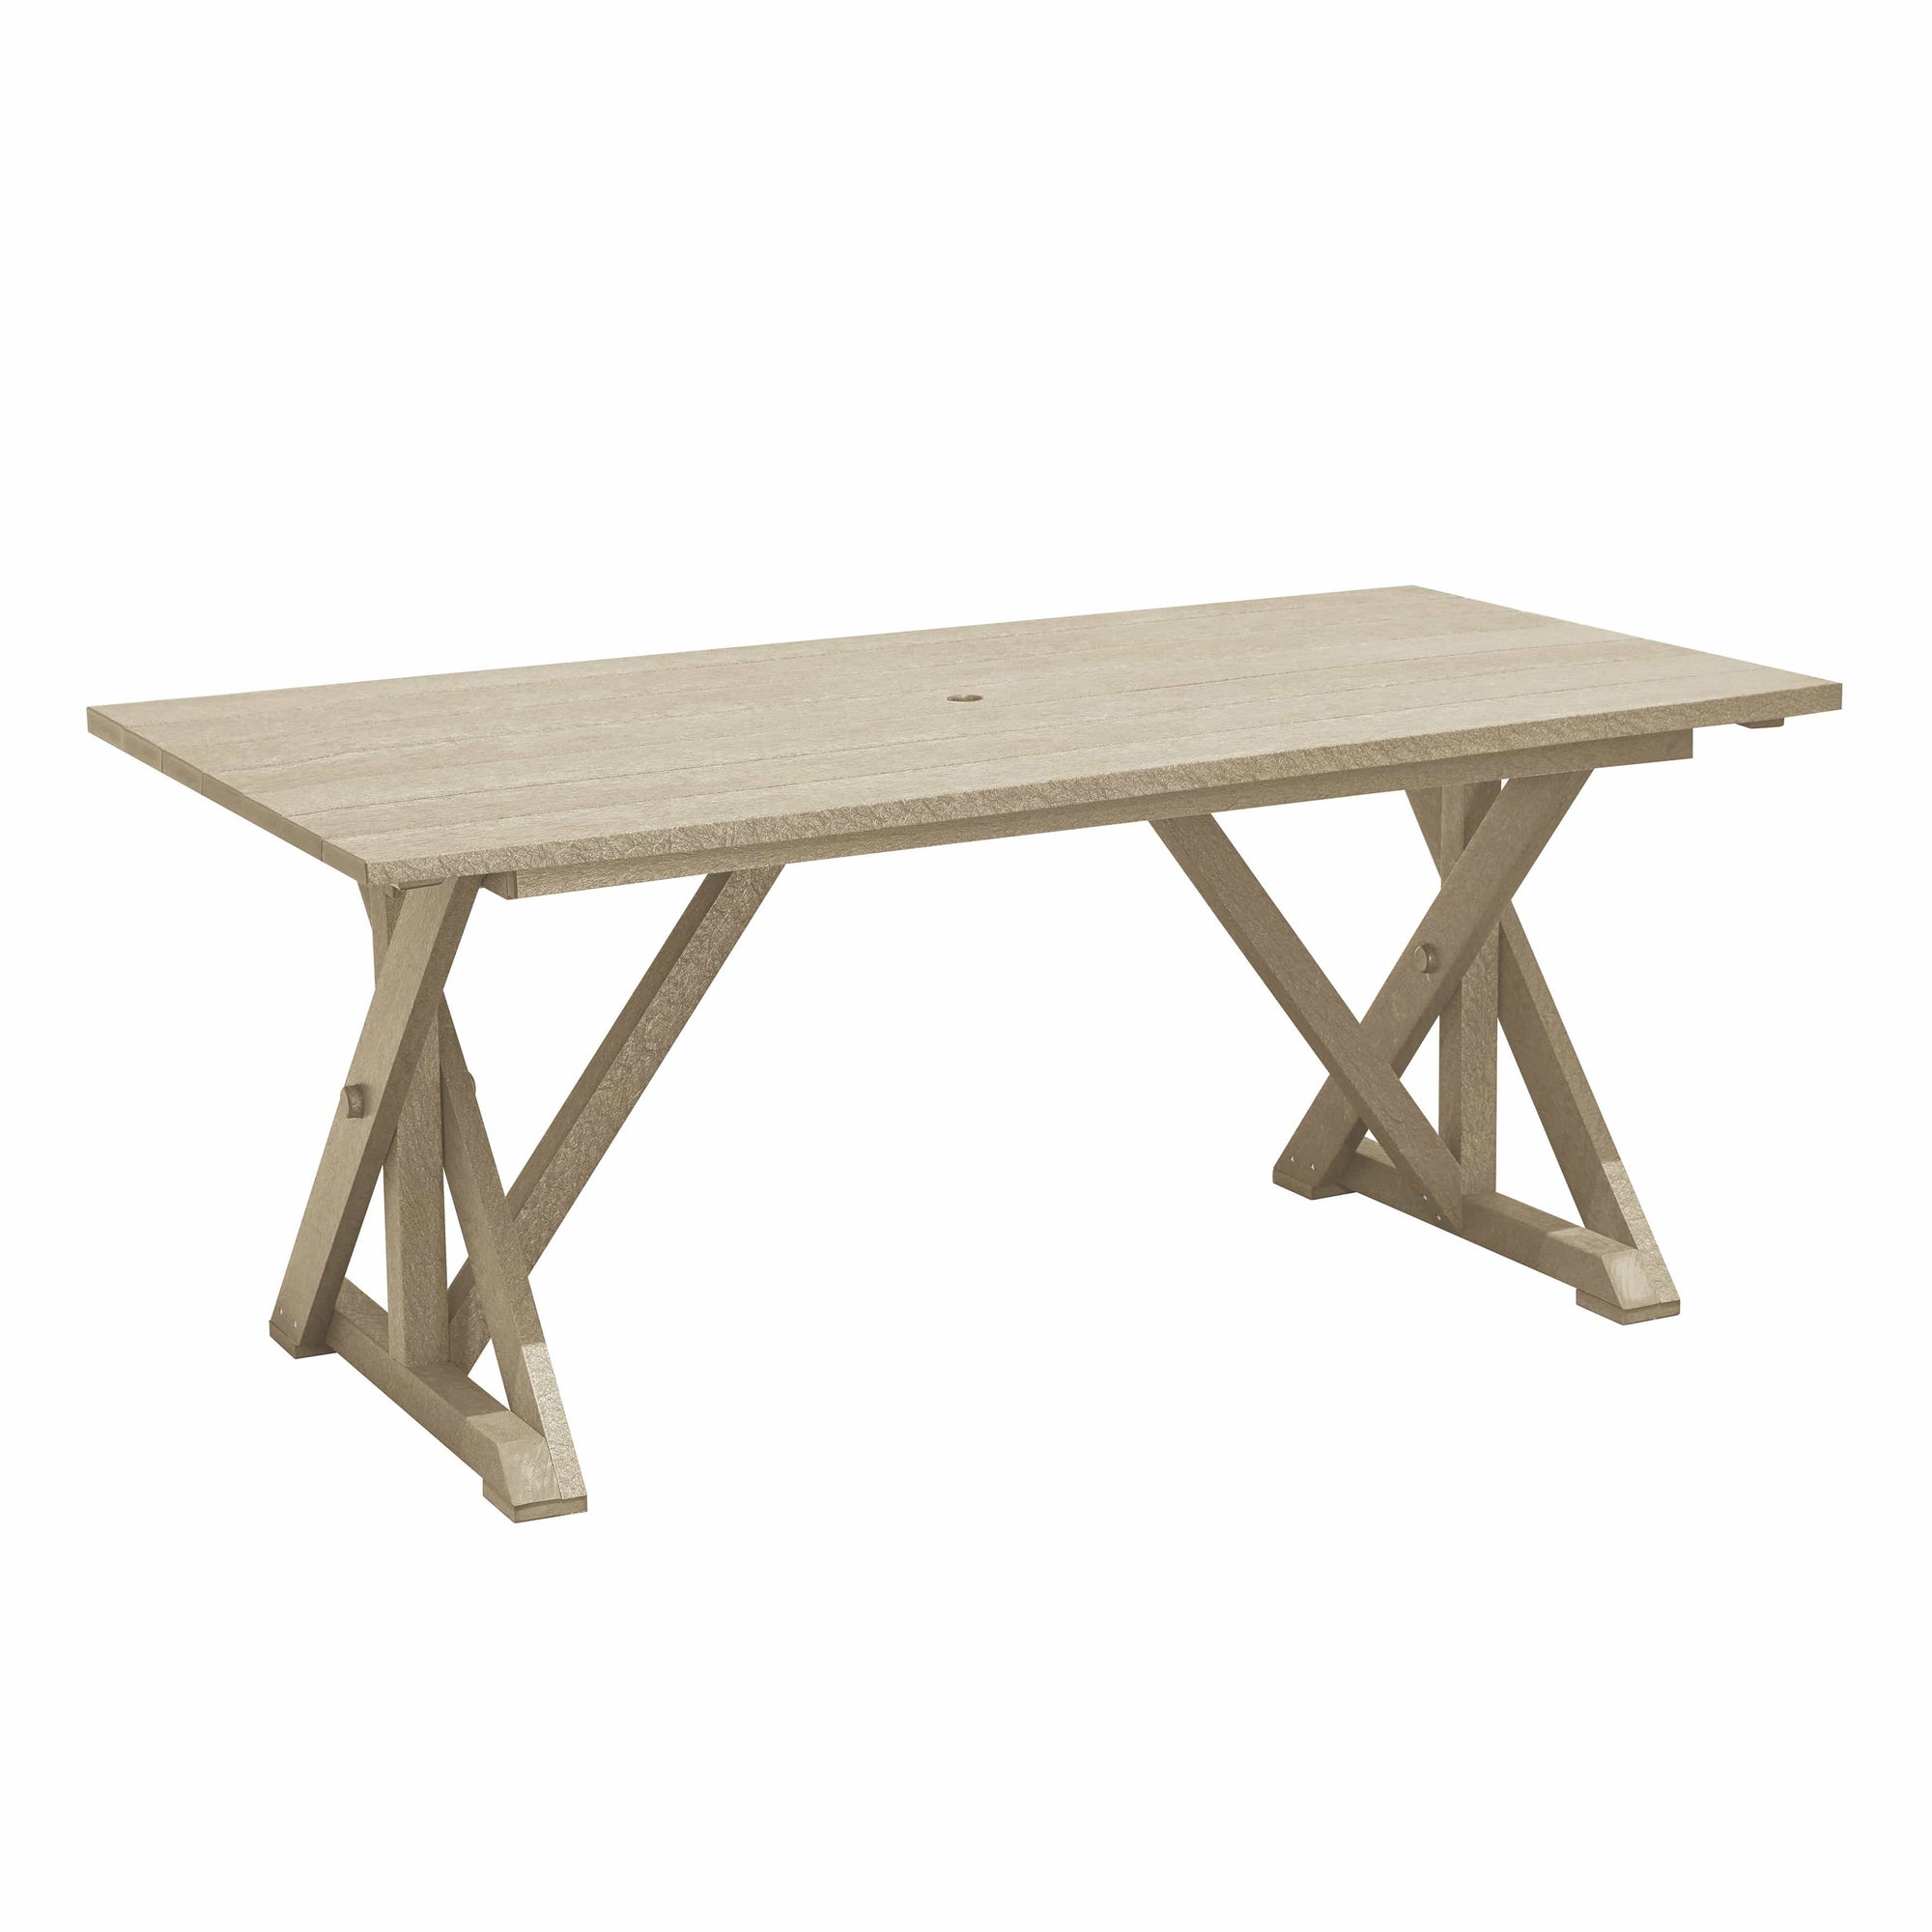 C.R. Plastic Products Table Beige-07 T203 Harvest Wide Dining Table w/2" Umbrella Hole